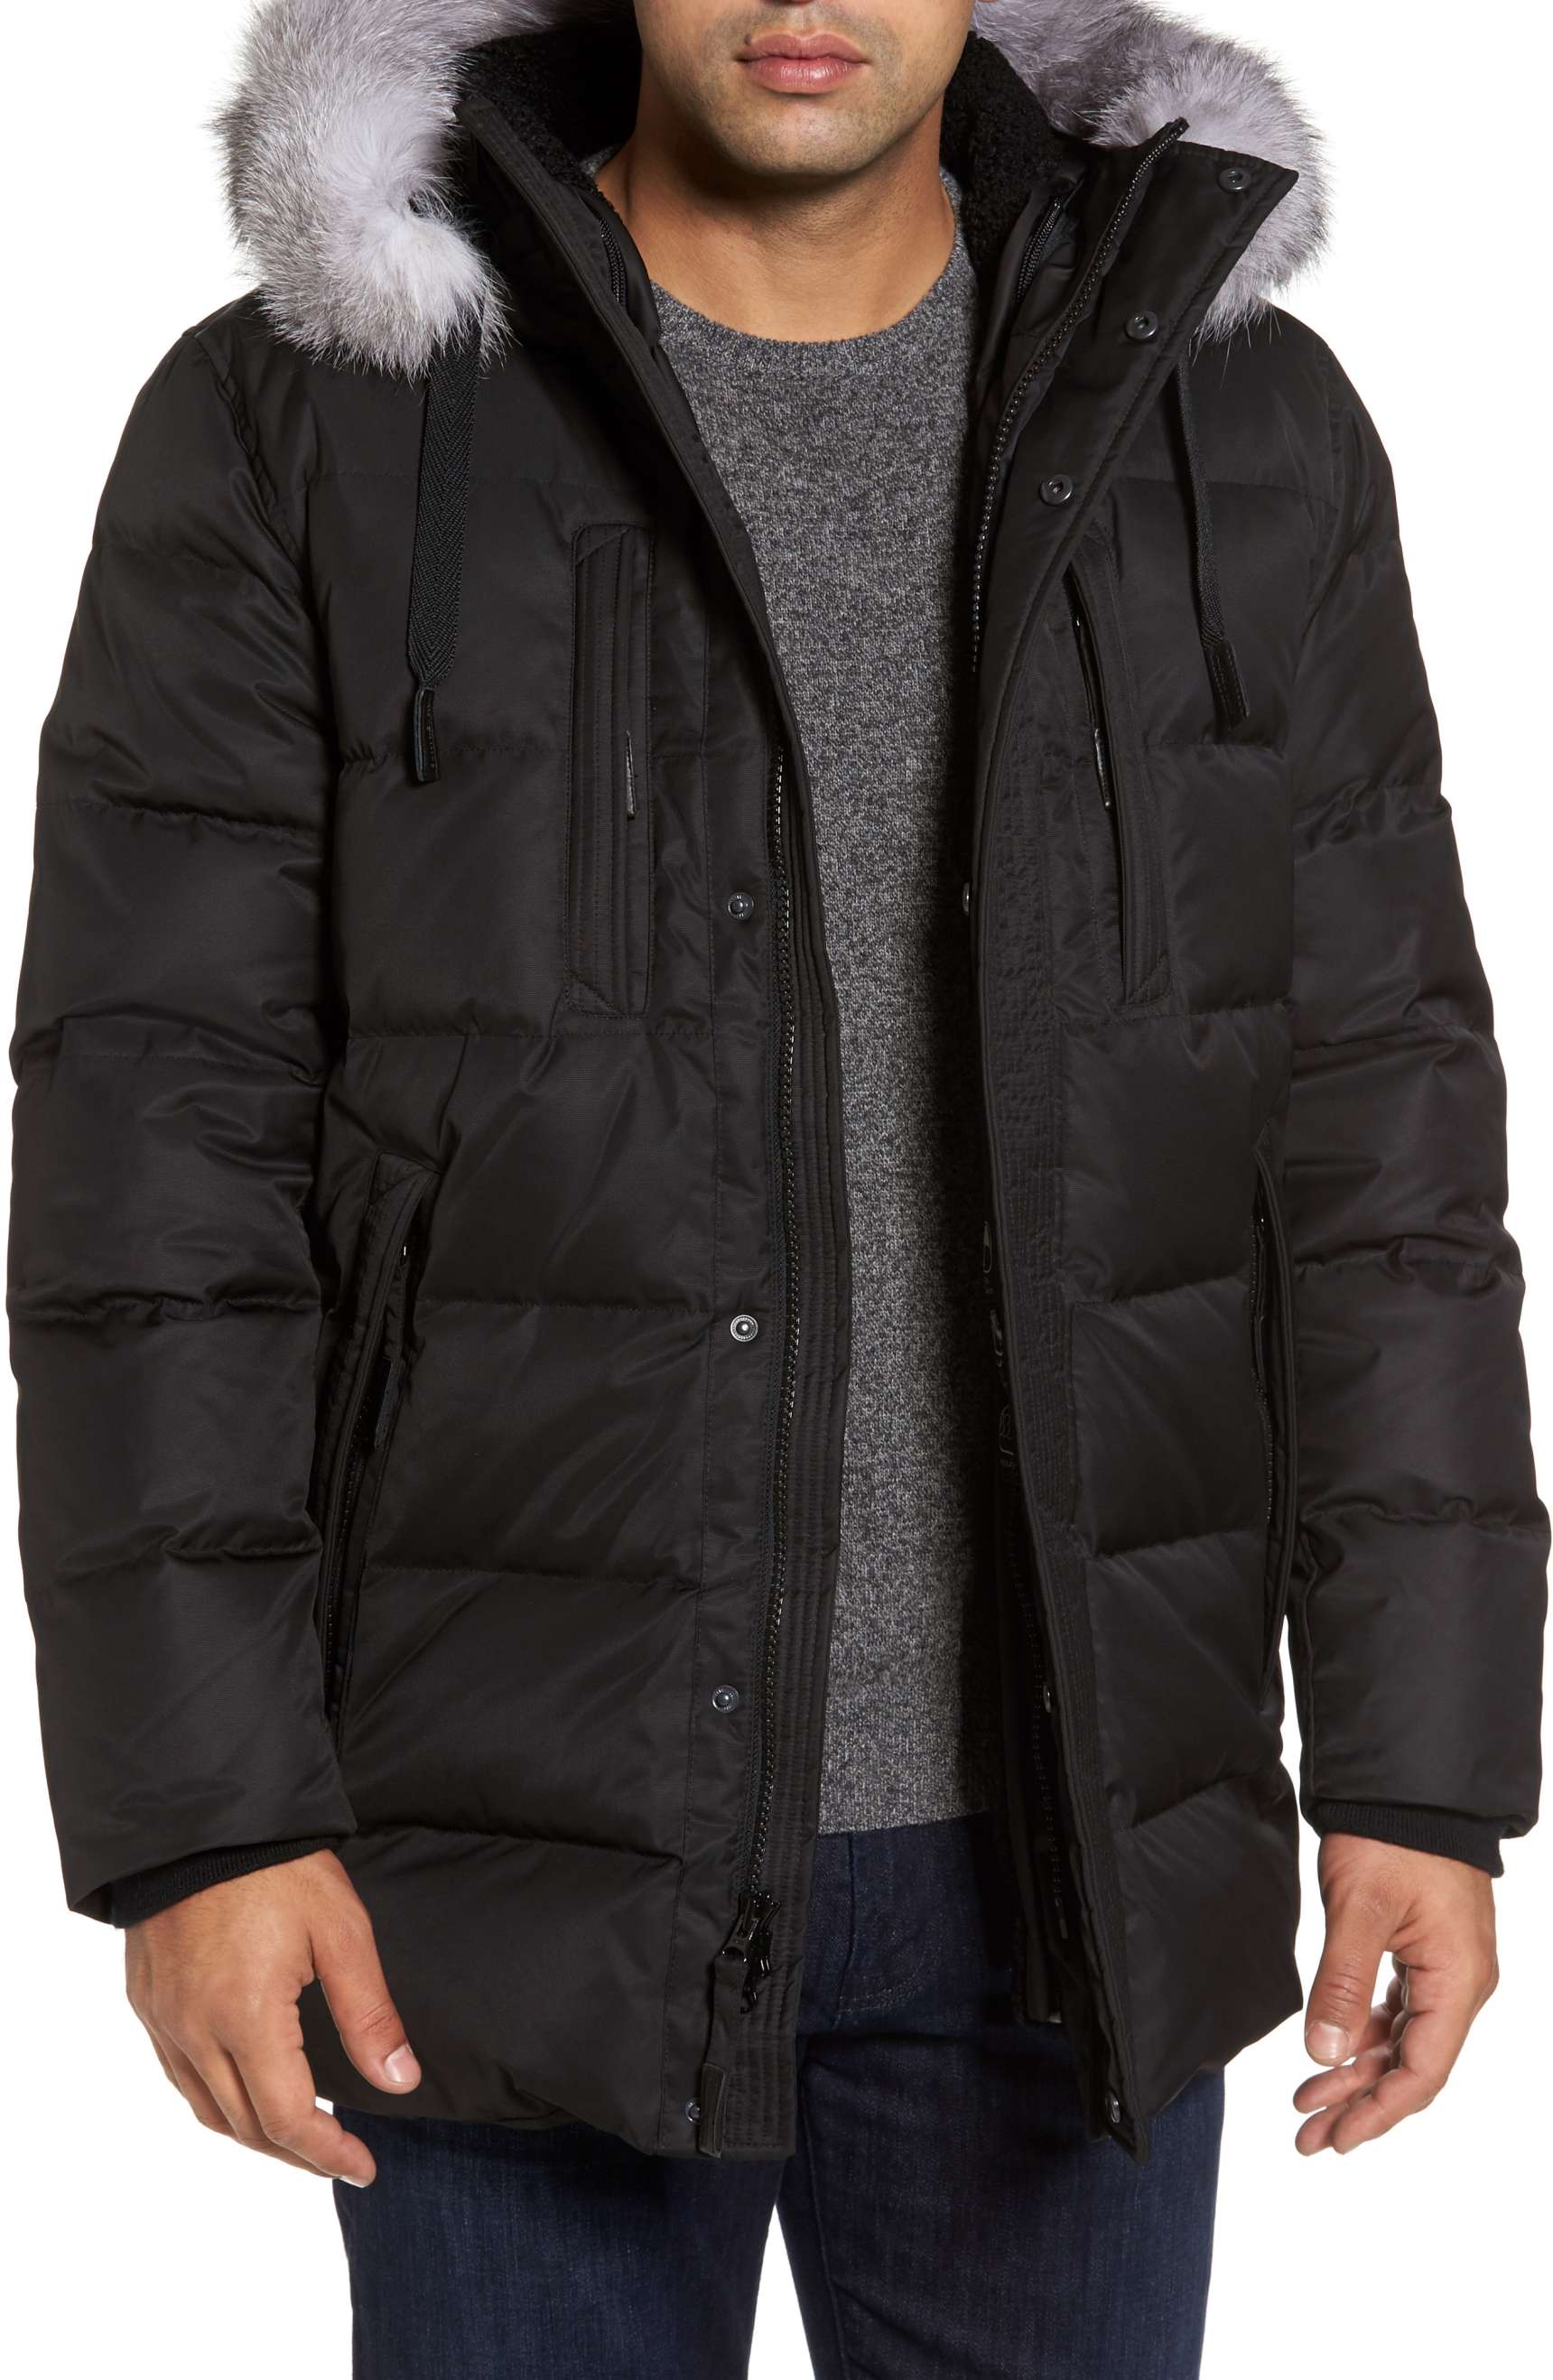 winter coats for men andrew marc quilted down winter jacket with fox fur trim in black - zgdvbrm